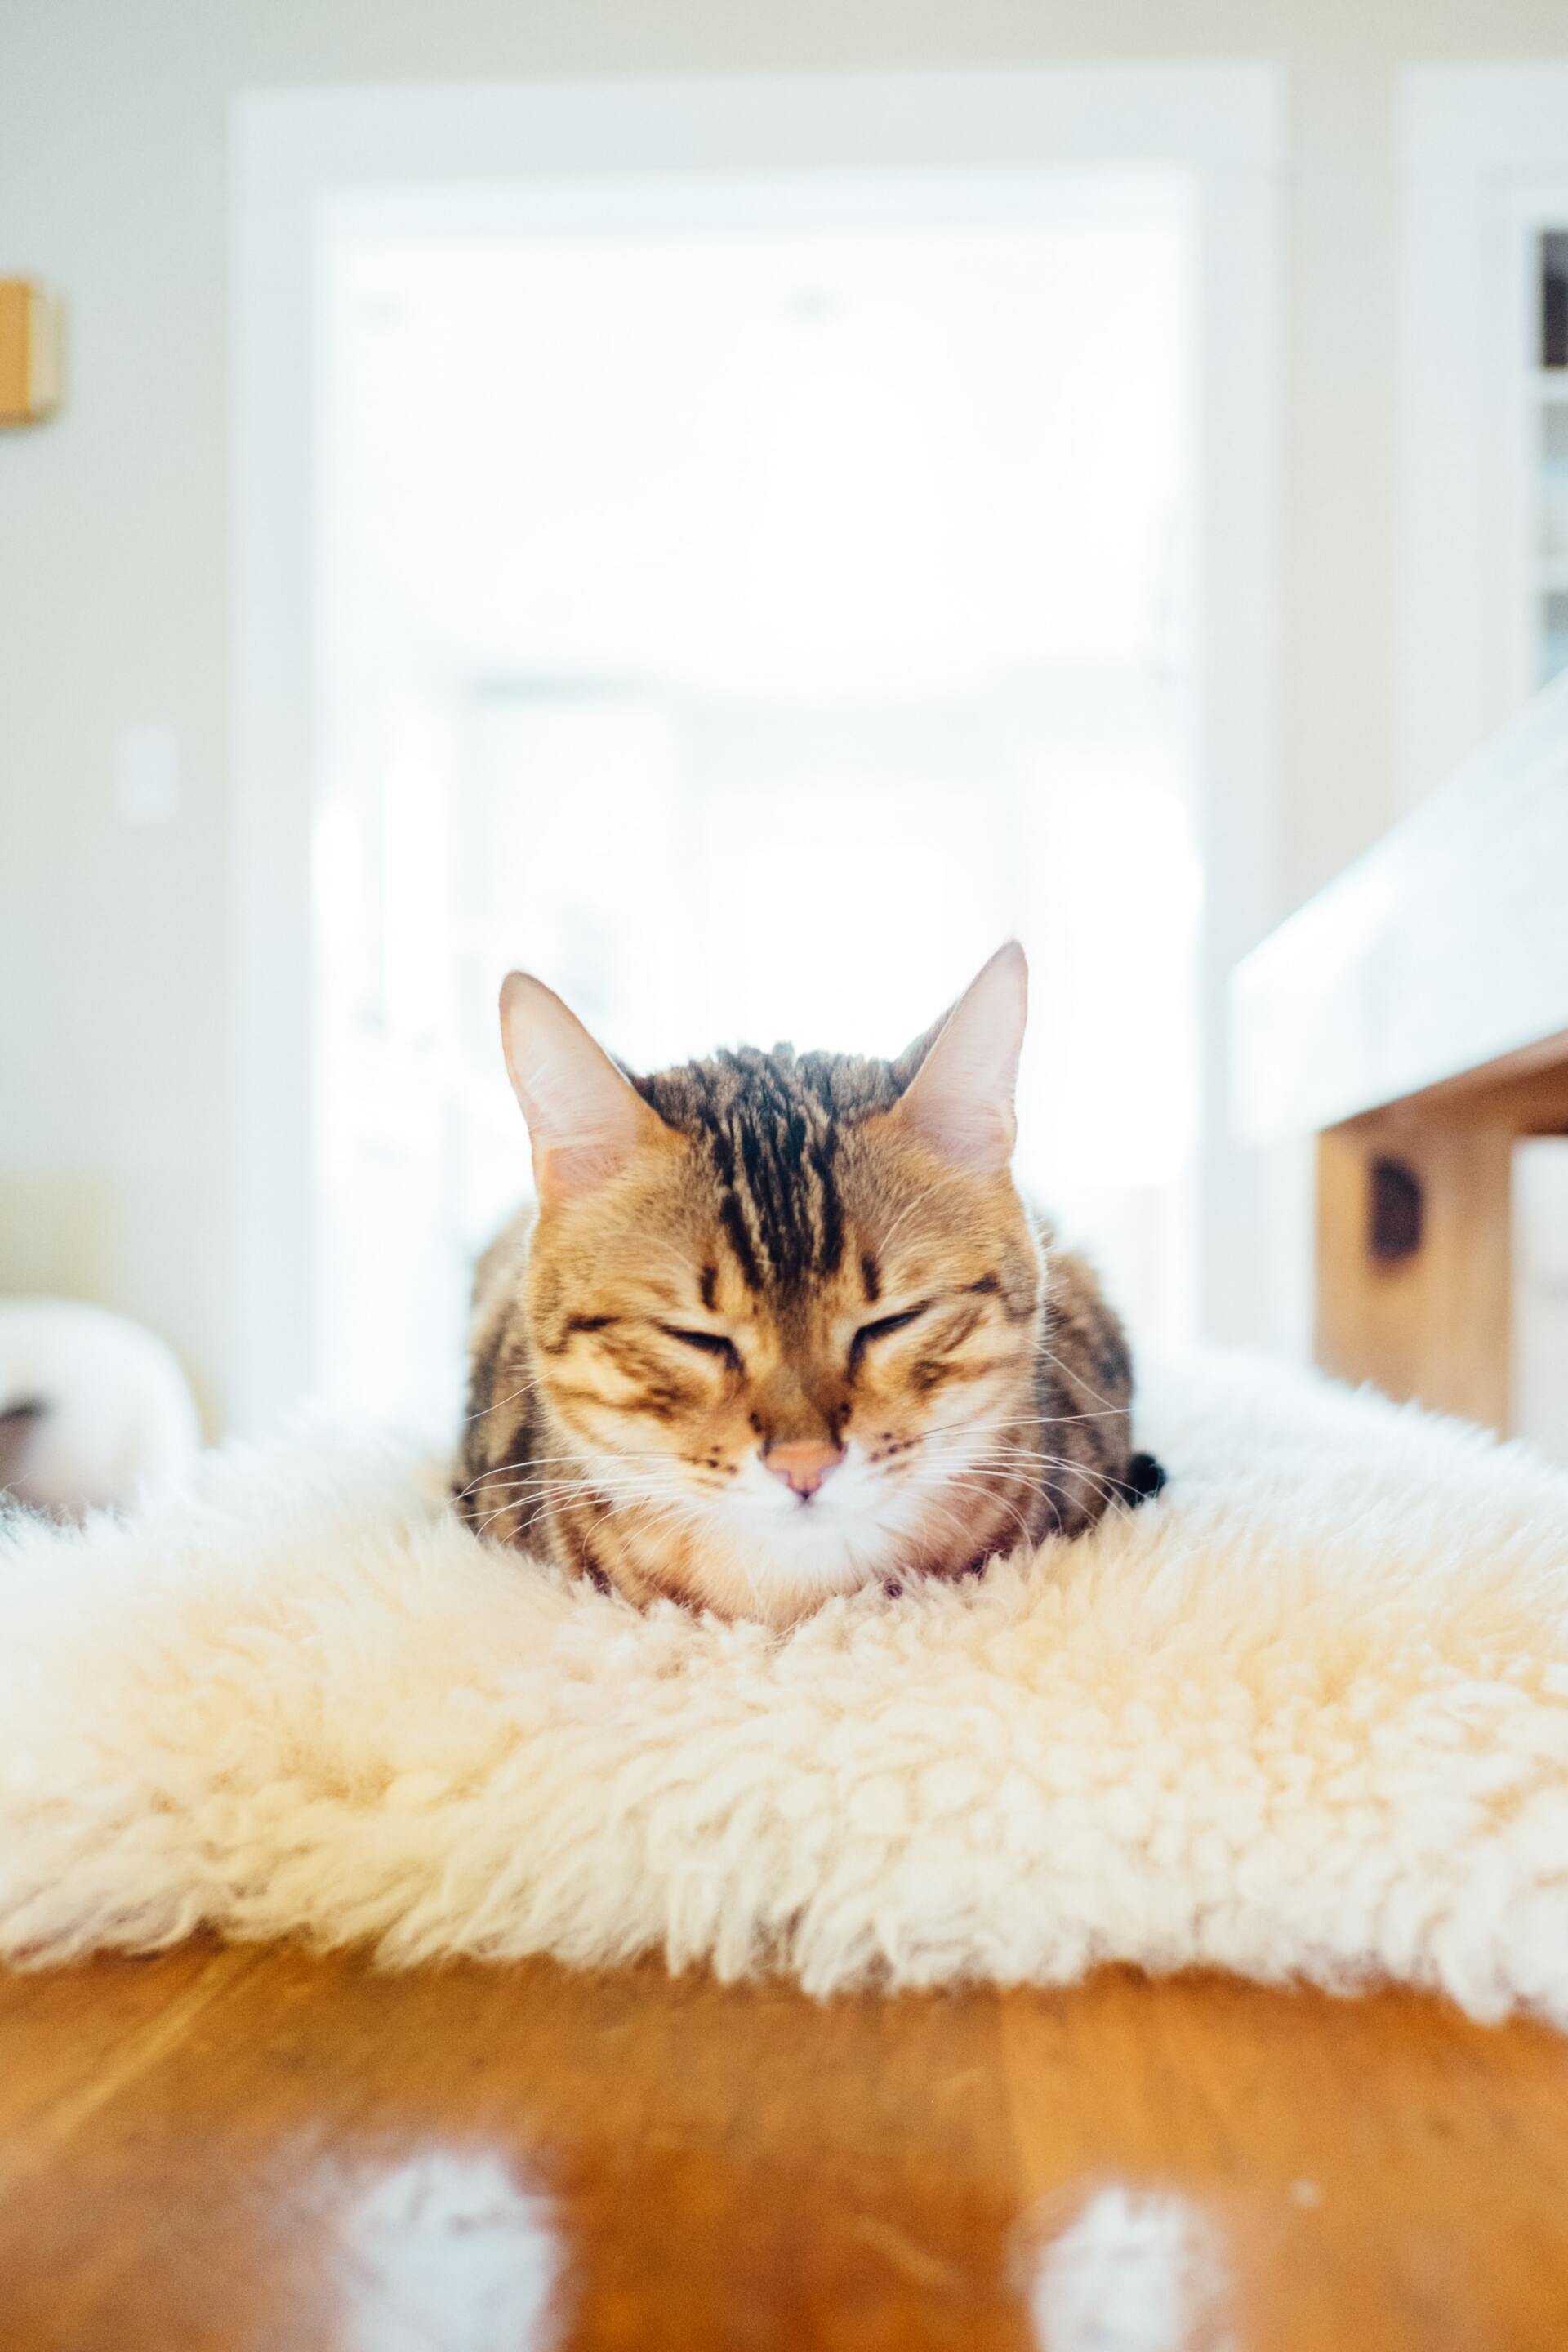 Senior cat diet and nutritional requirements